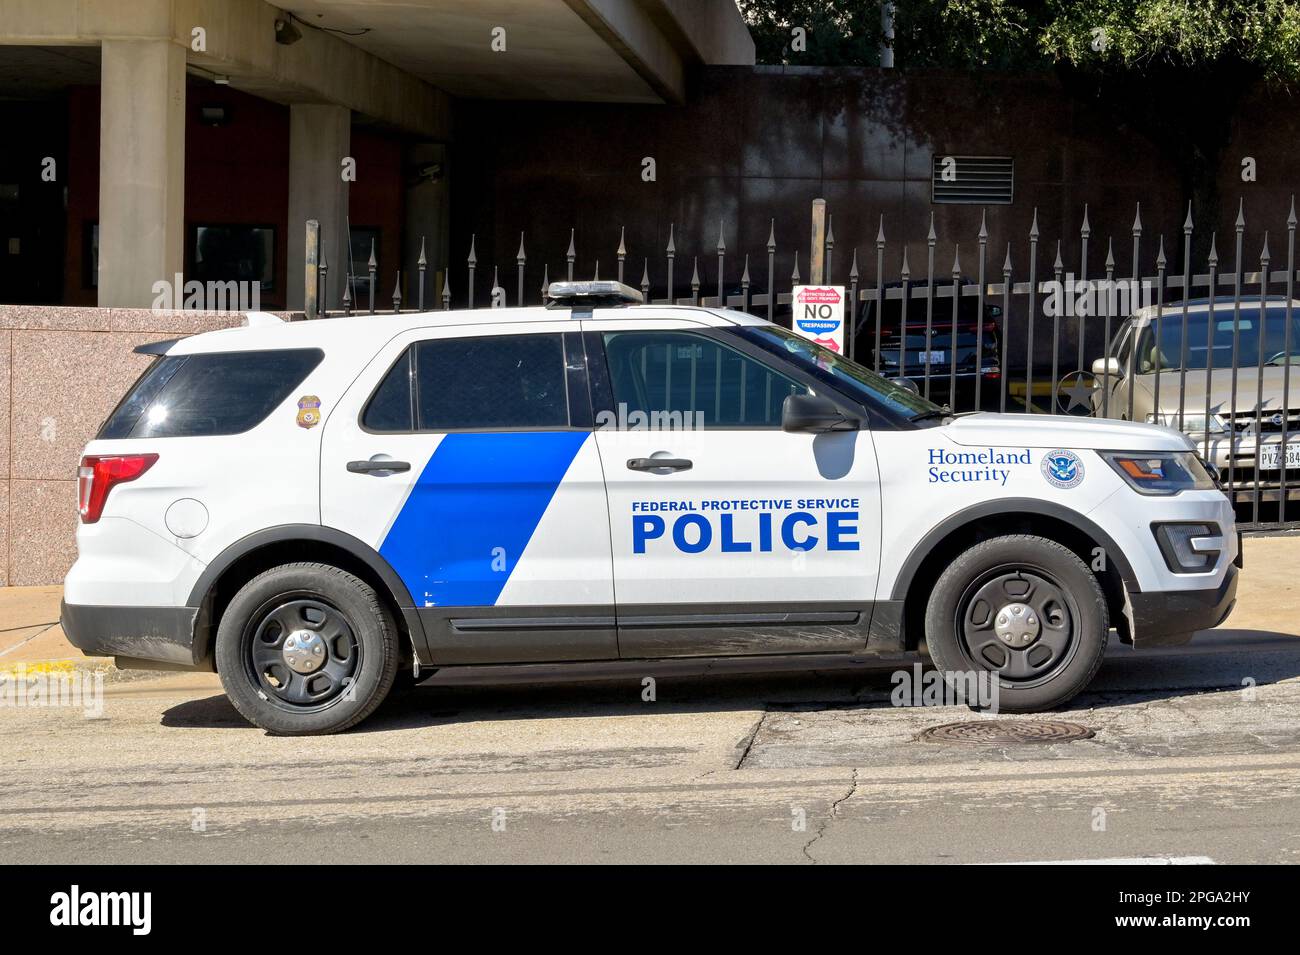 Austin, Texas, USA - February 2023: Federal police patrol car operated by the Department of Homeland Security parked on a street in the city centre Stock Photo